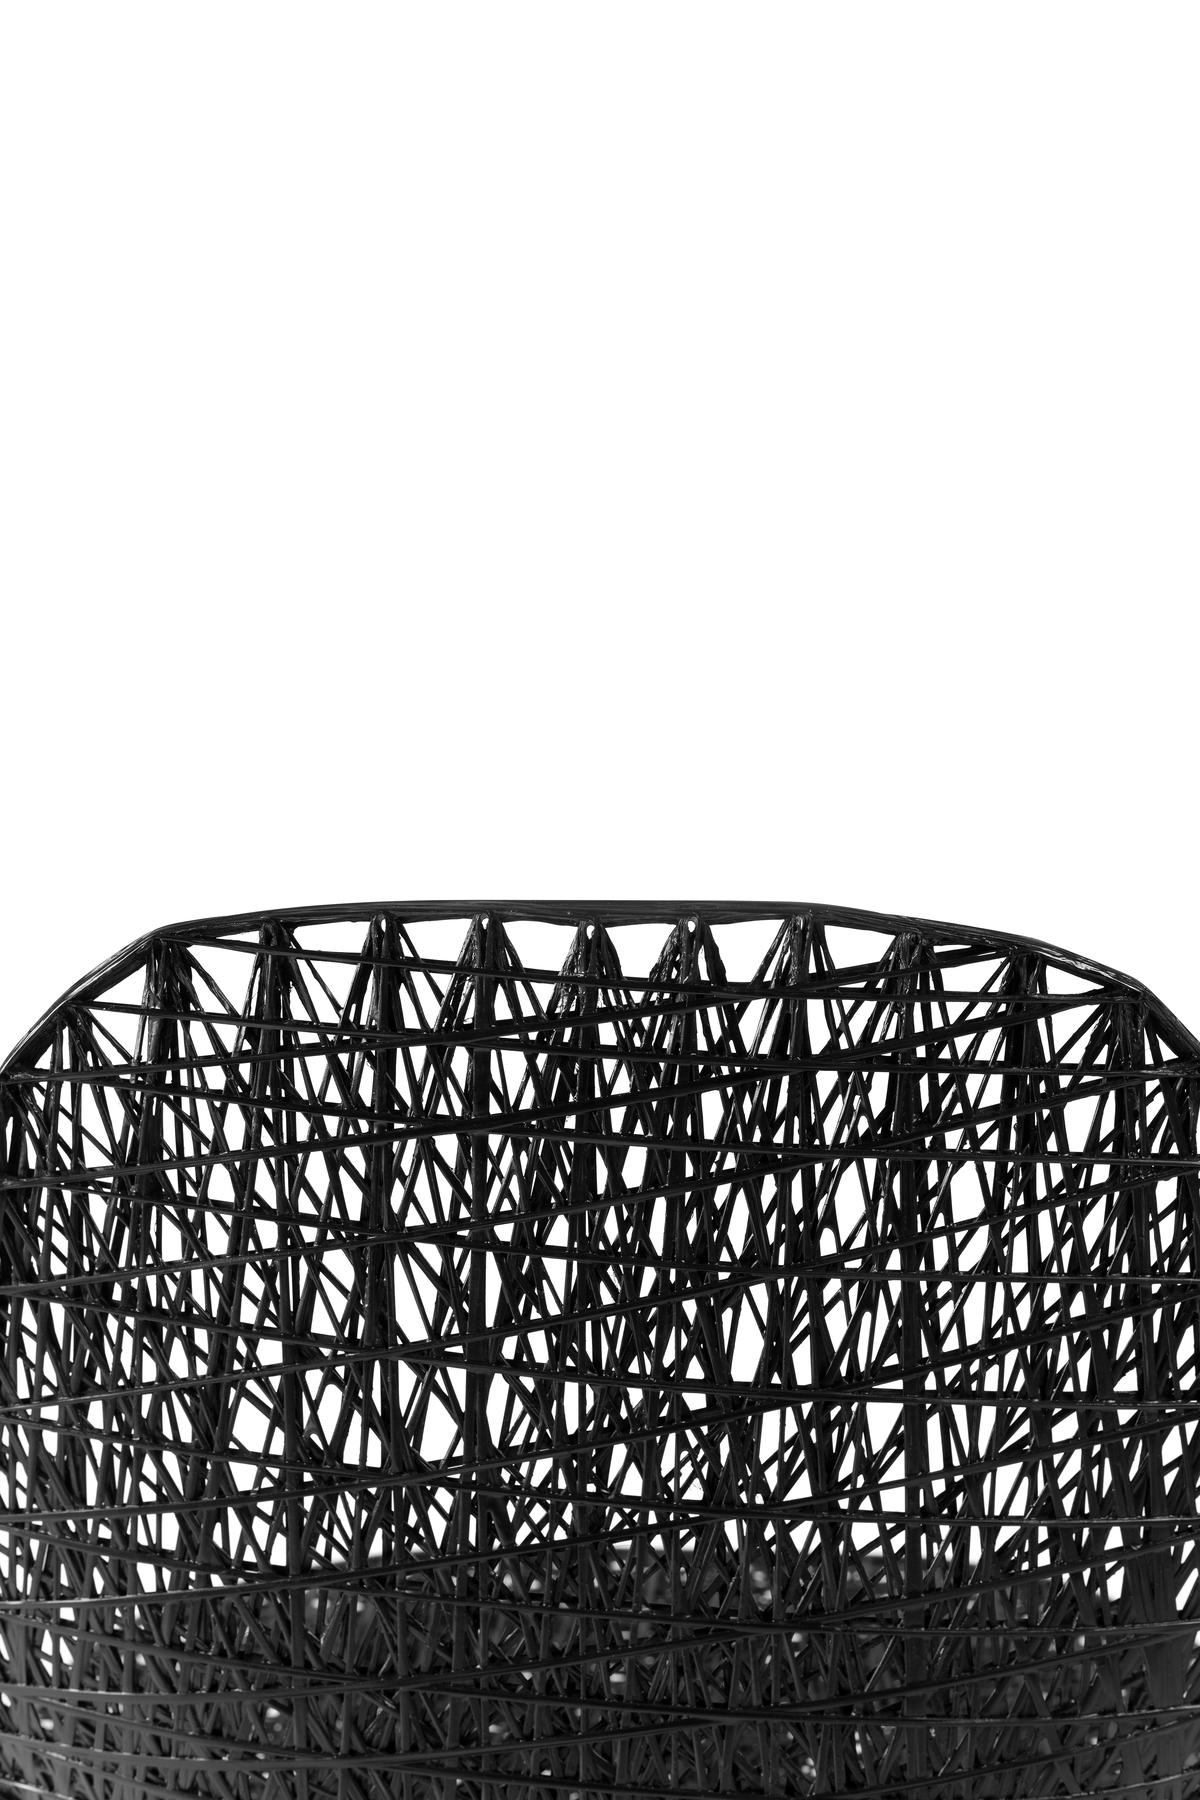 Moooi Carbon Chair in Black Fiber with Epoxy Resin by Bertjan Pot For Sale 1